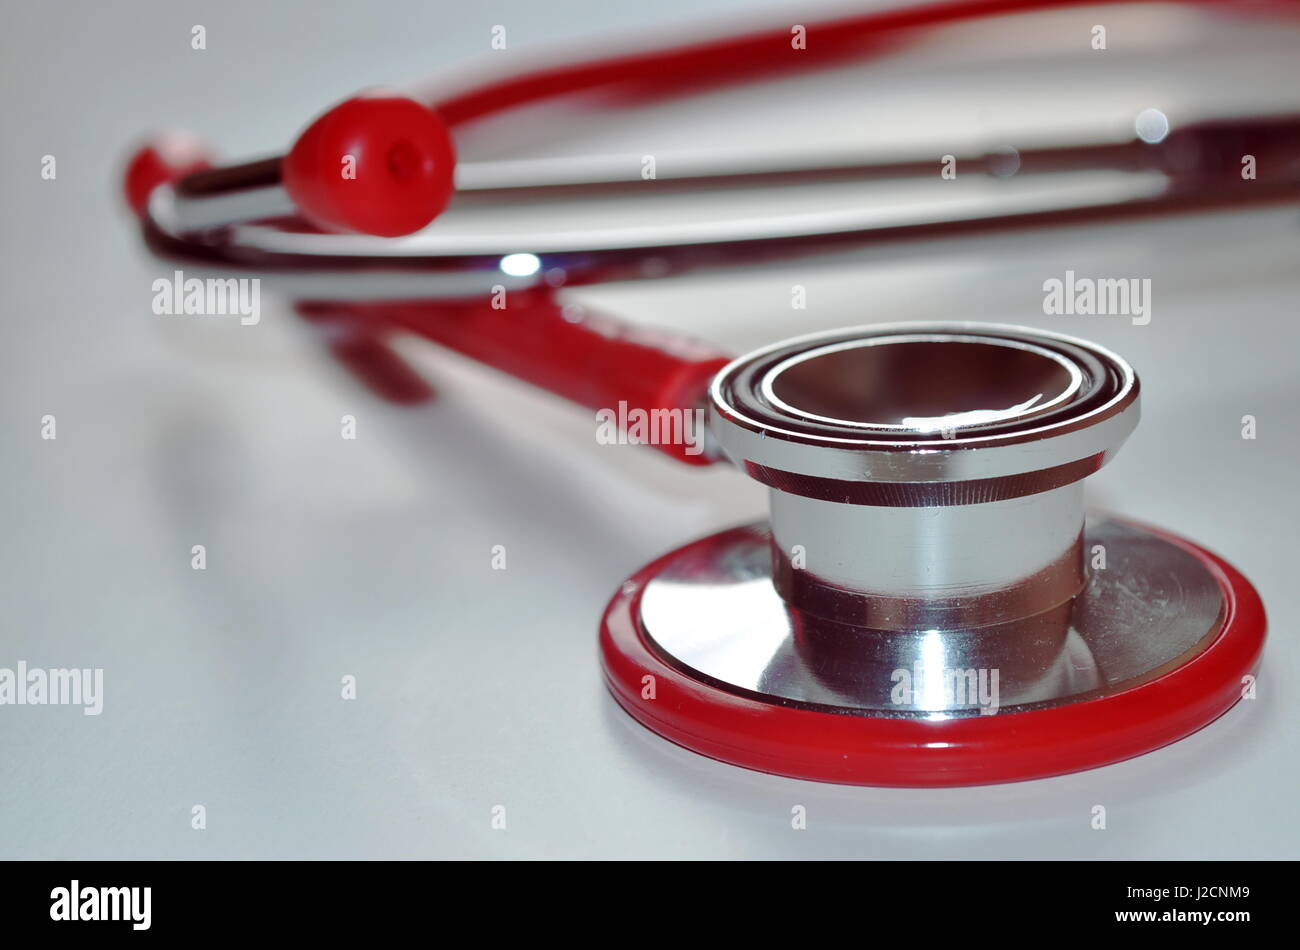 Close-up of a red stethoscope Stock Photo